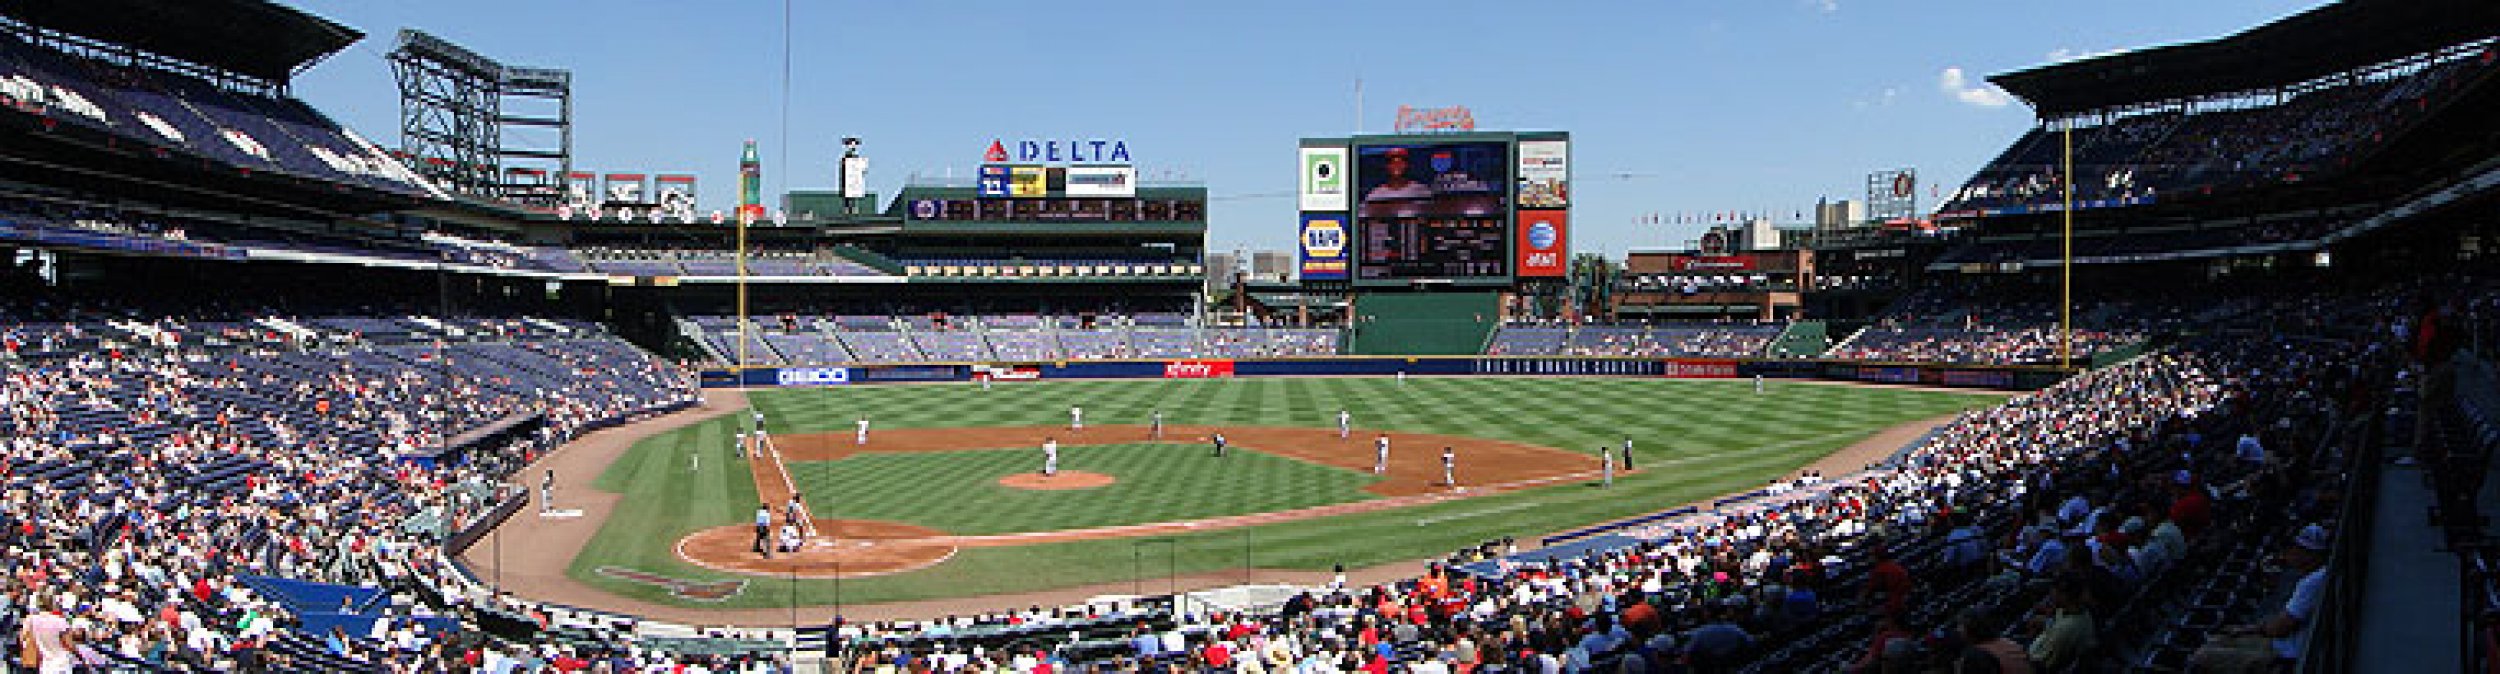 Braves to relocate to new ballpark in Cobb County for 2017 season 